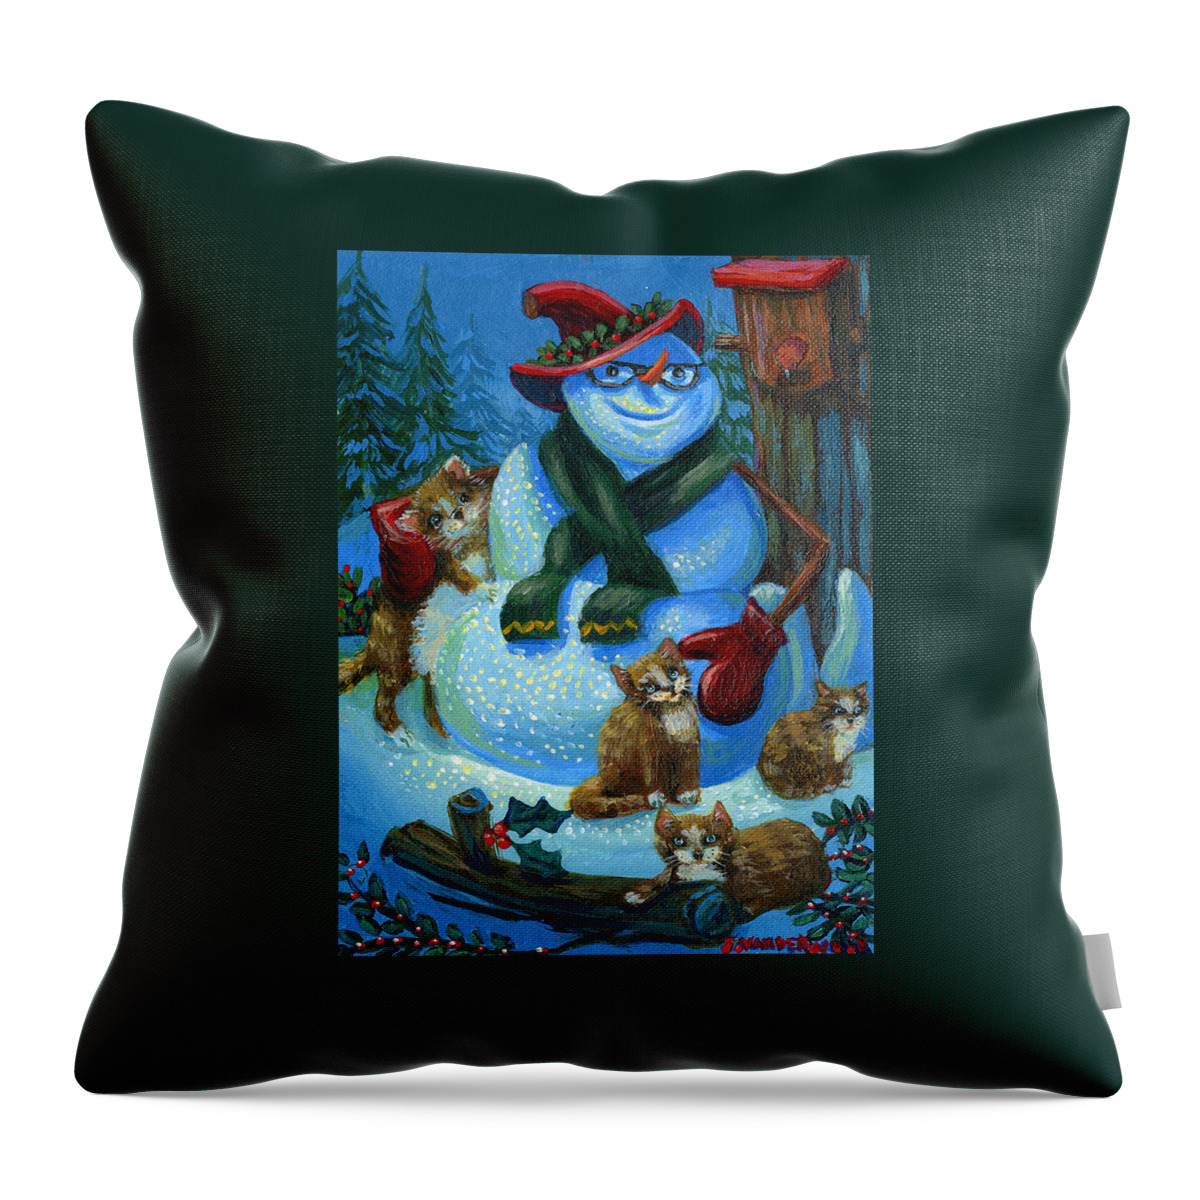 Snowman Throw Pillow featuring the painting Jolly Snowman and Friends by Jacquelin L Vanderwood Westerman